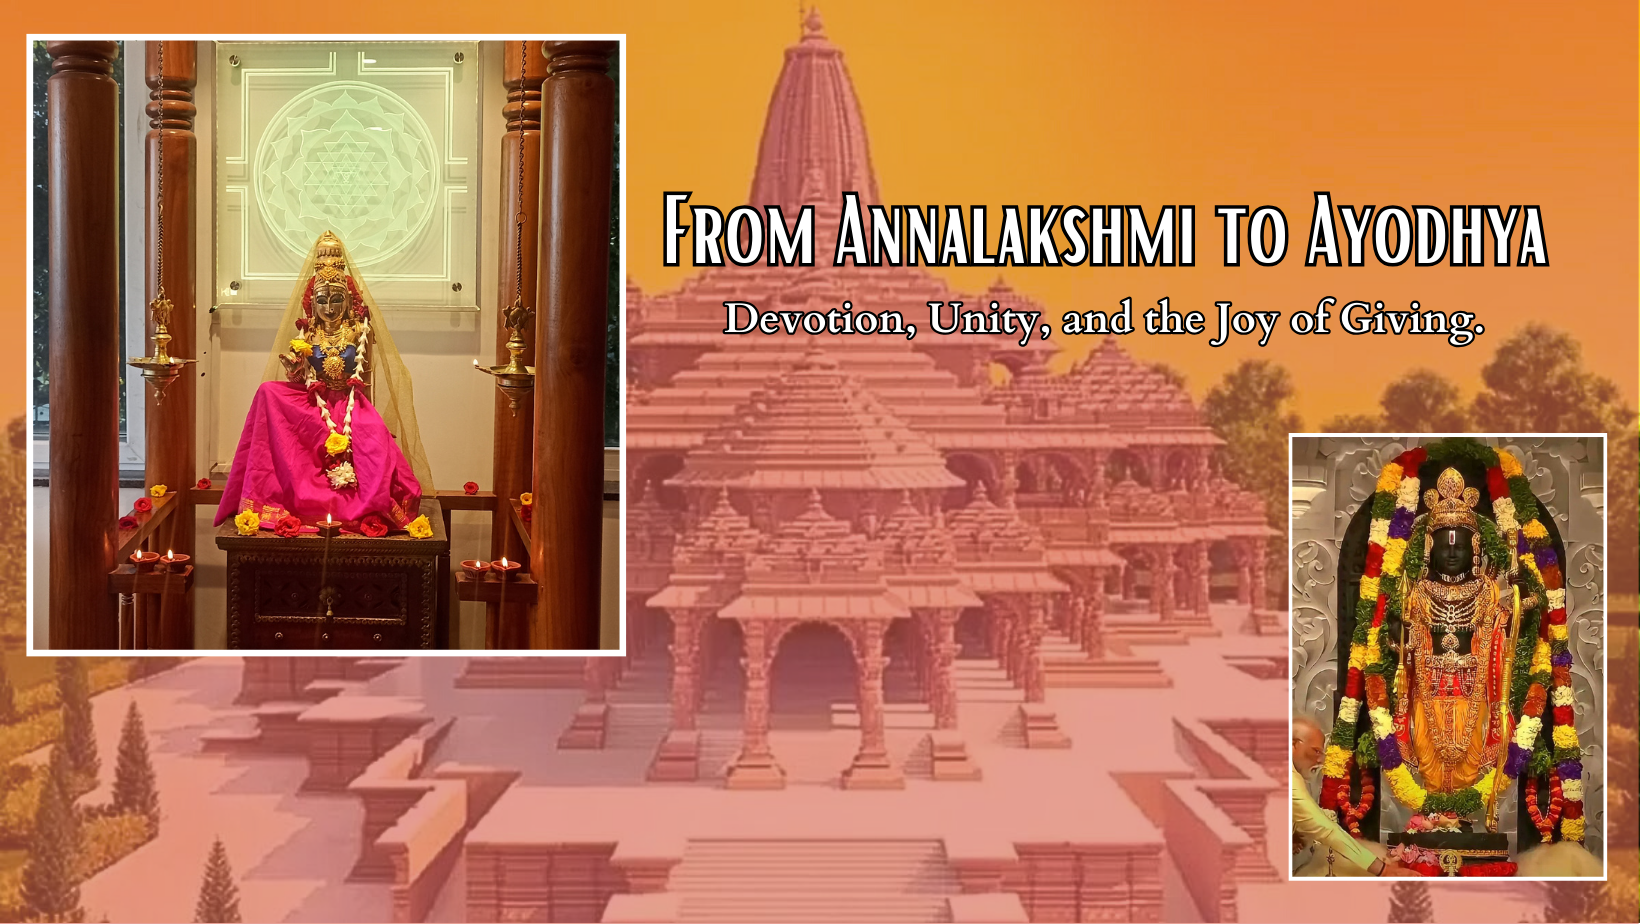 From Annalakshmi to Ayodhya - Devotion, Unity, and the Joy of Giving.